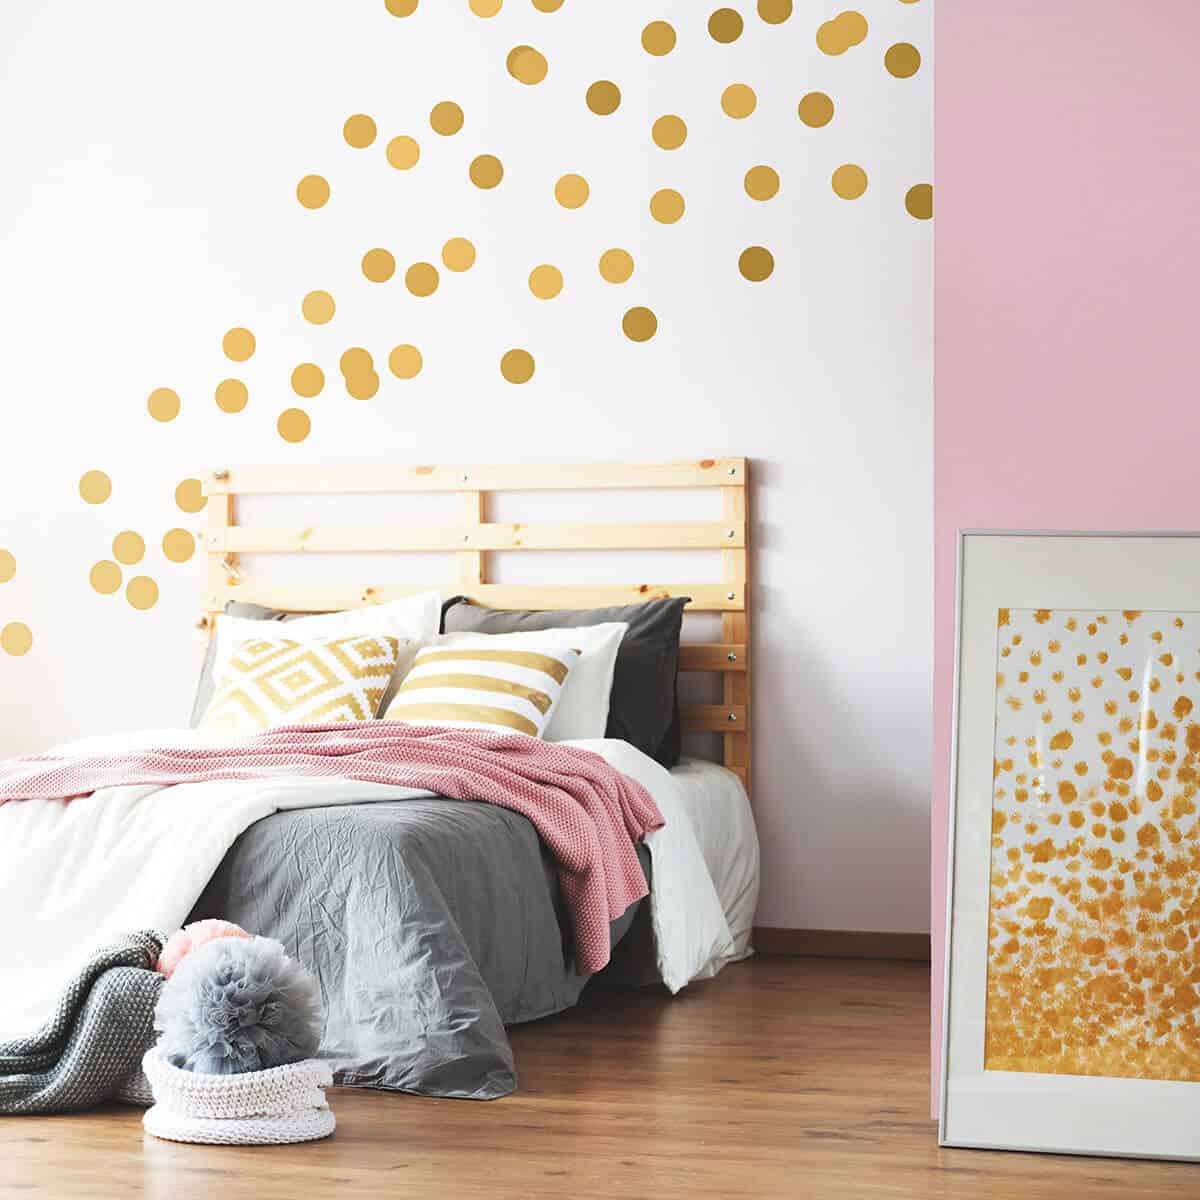 white bedroom wall design with gold stickers